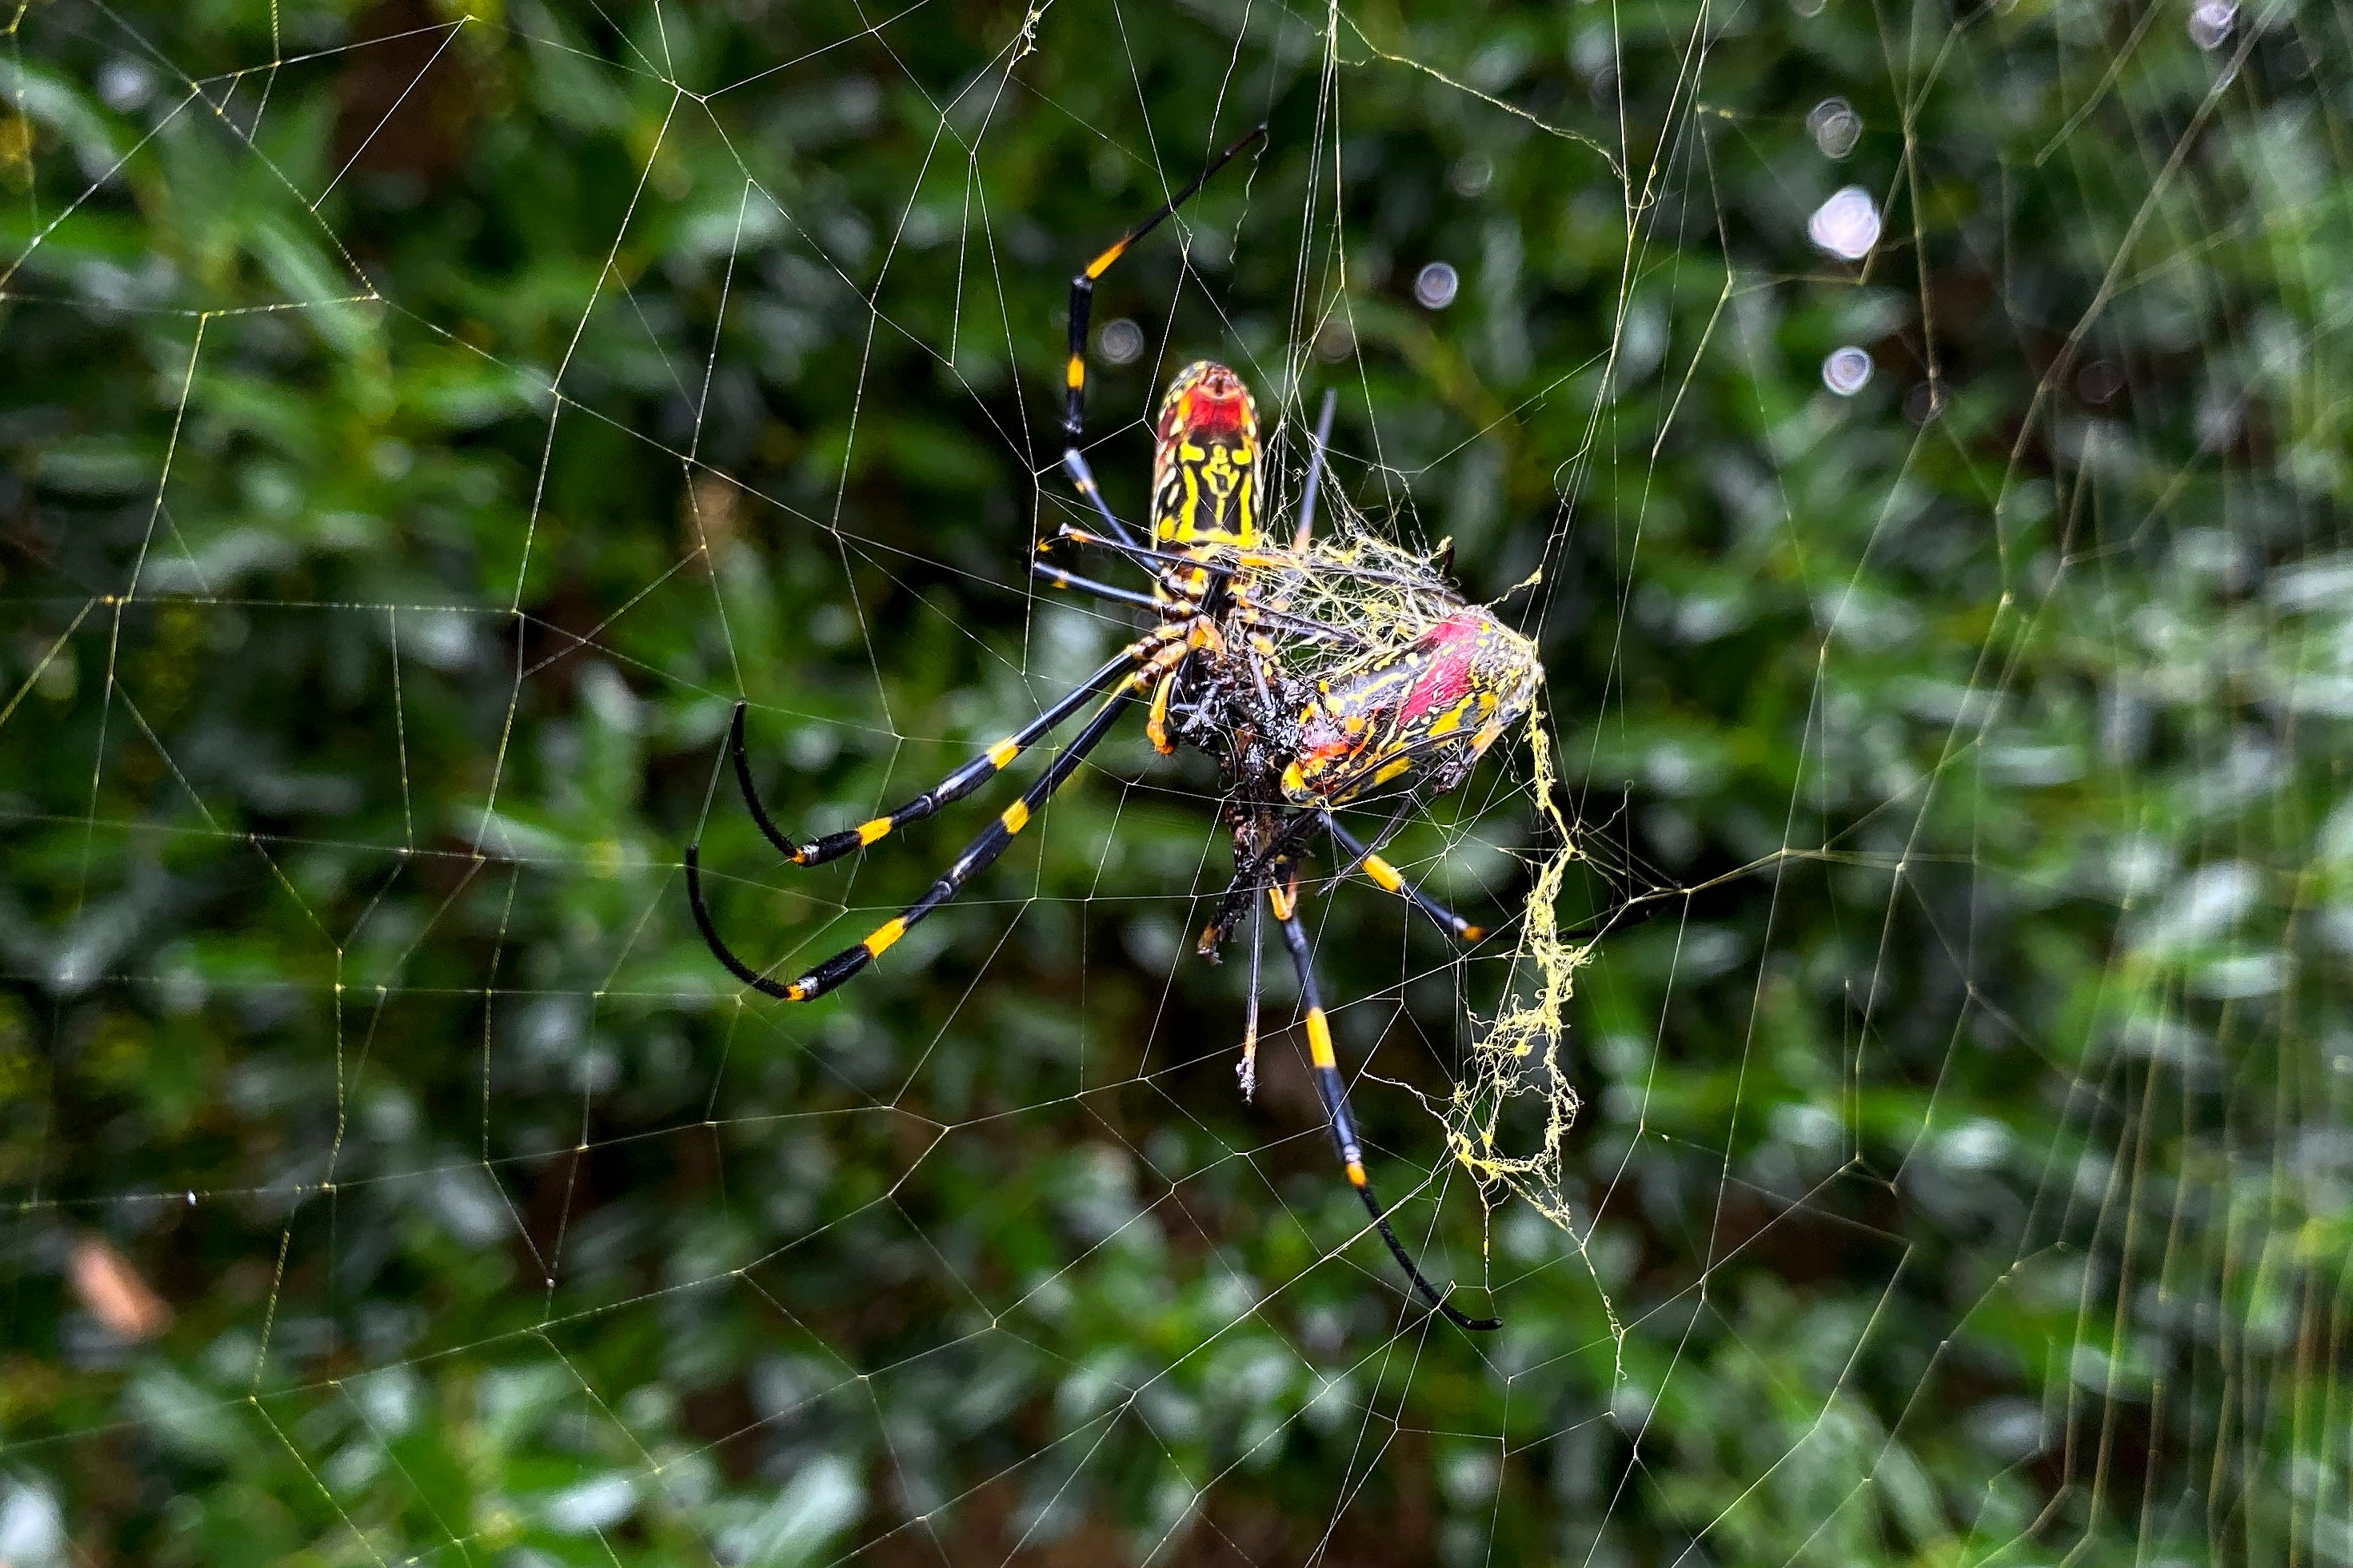 Joro spiders are master hunters of mosquitos and brown stink bugs, which destroy crops